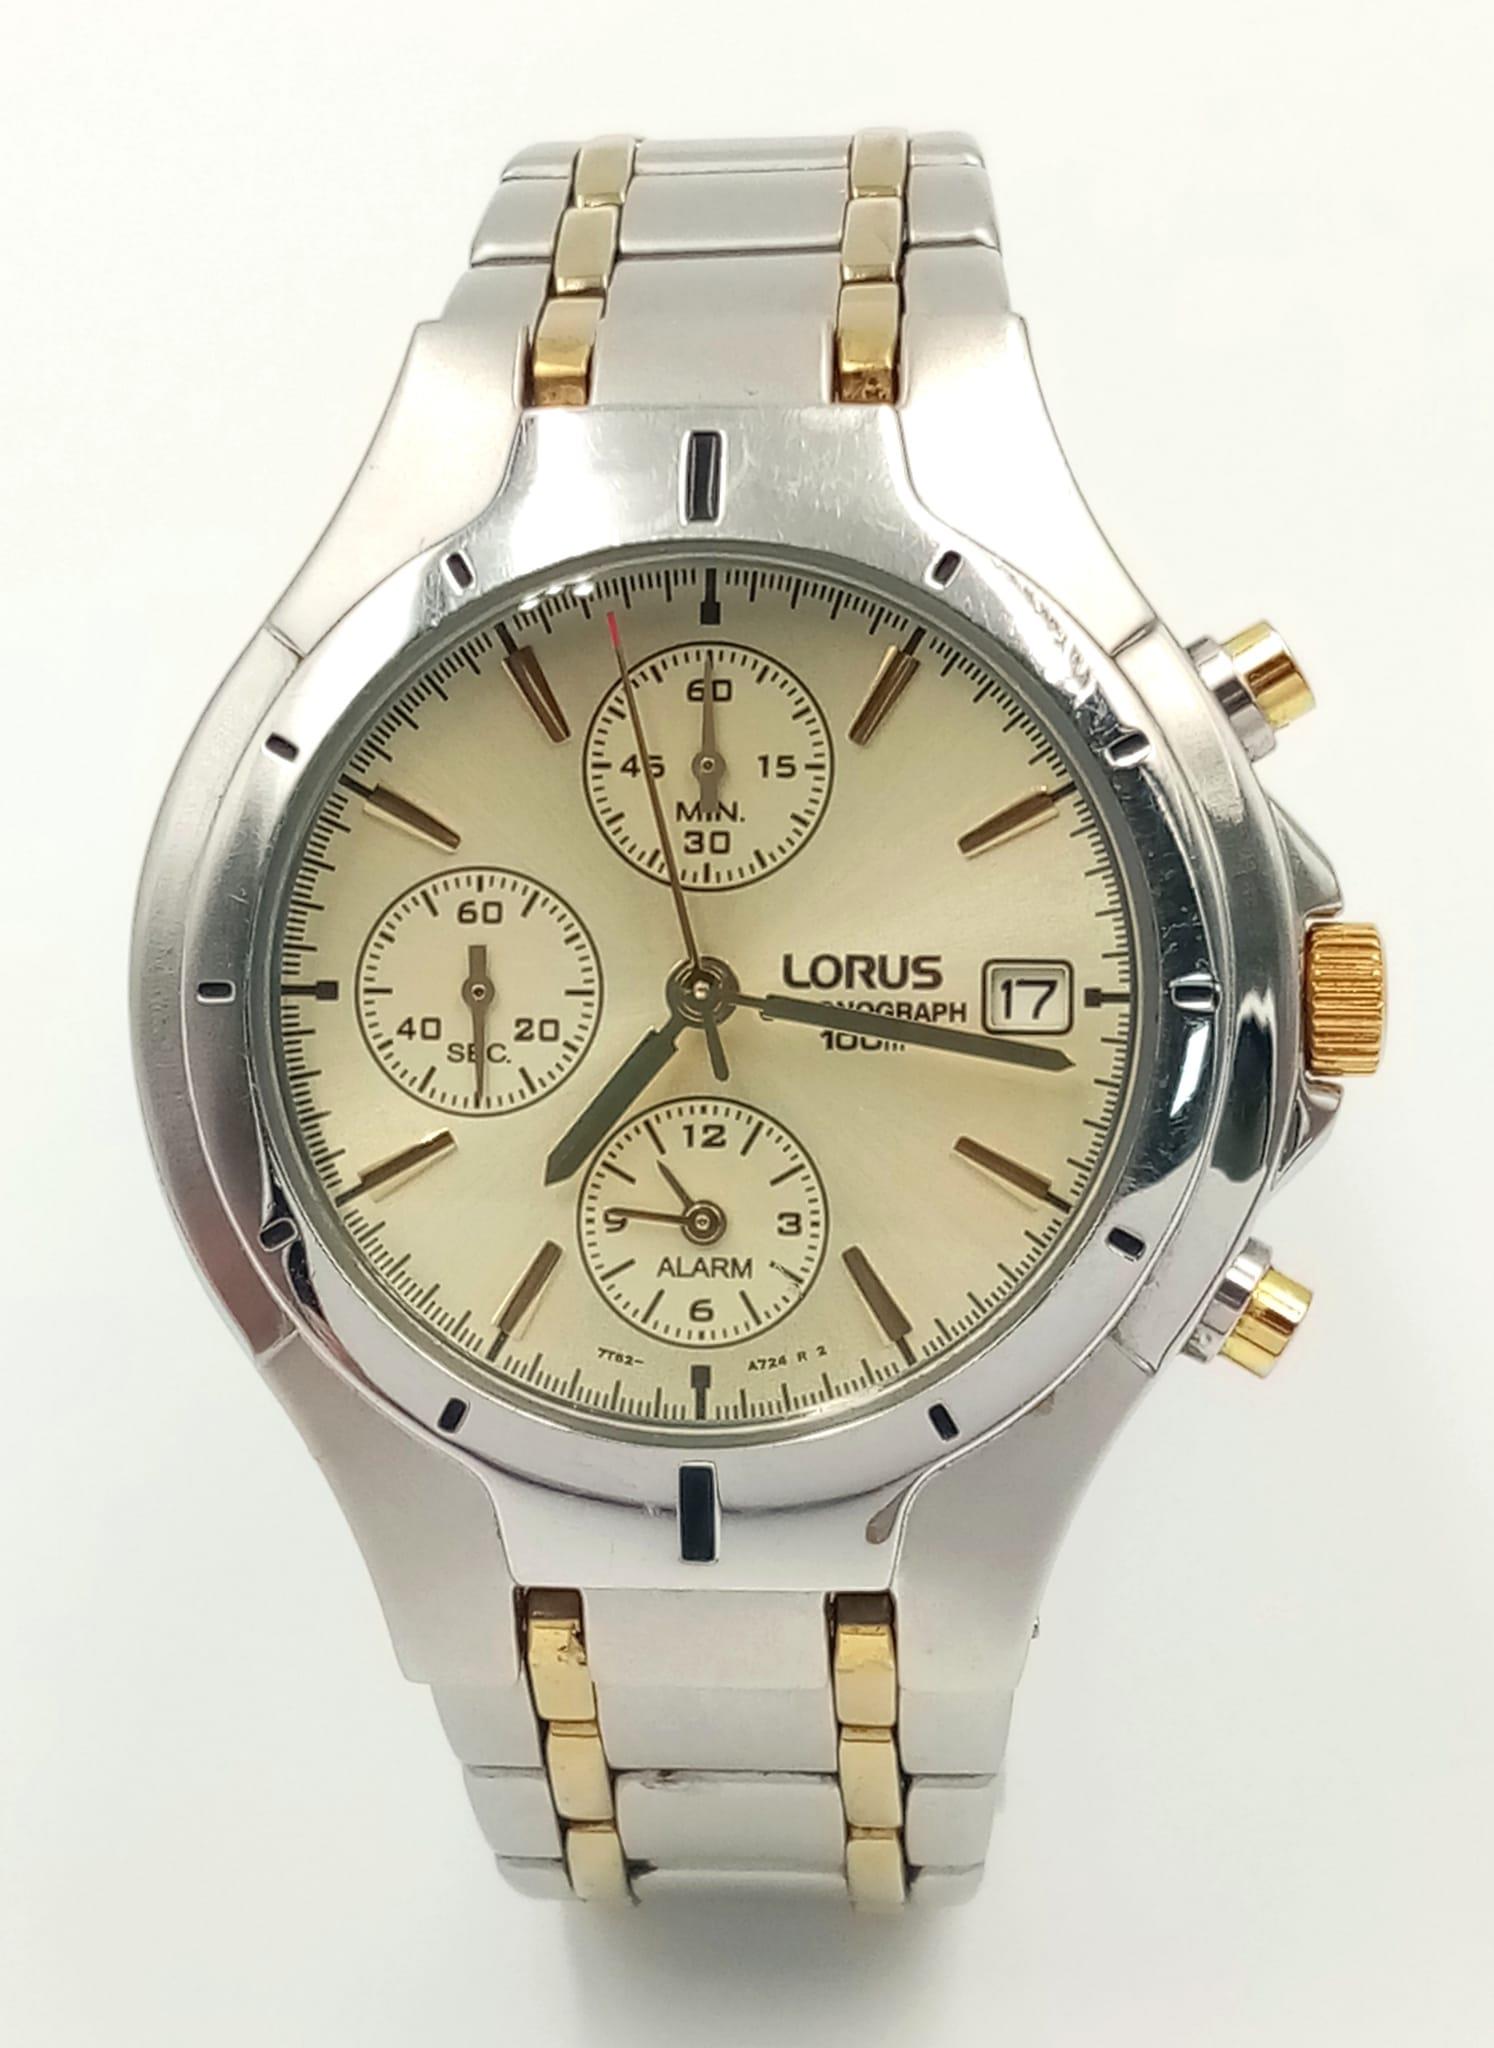 A Two-Tone B-Metal Quartz Chronograph Date Watch by Lorus. 41mm Including Crown. New Battery - Image 3 of 6